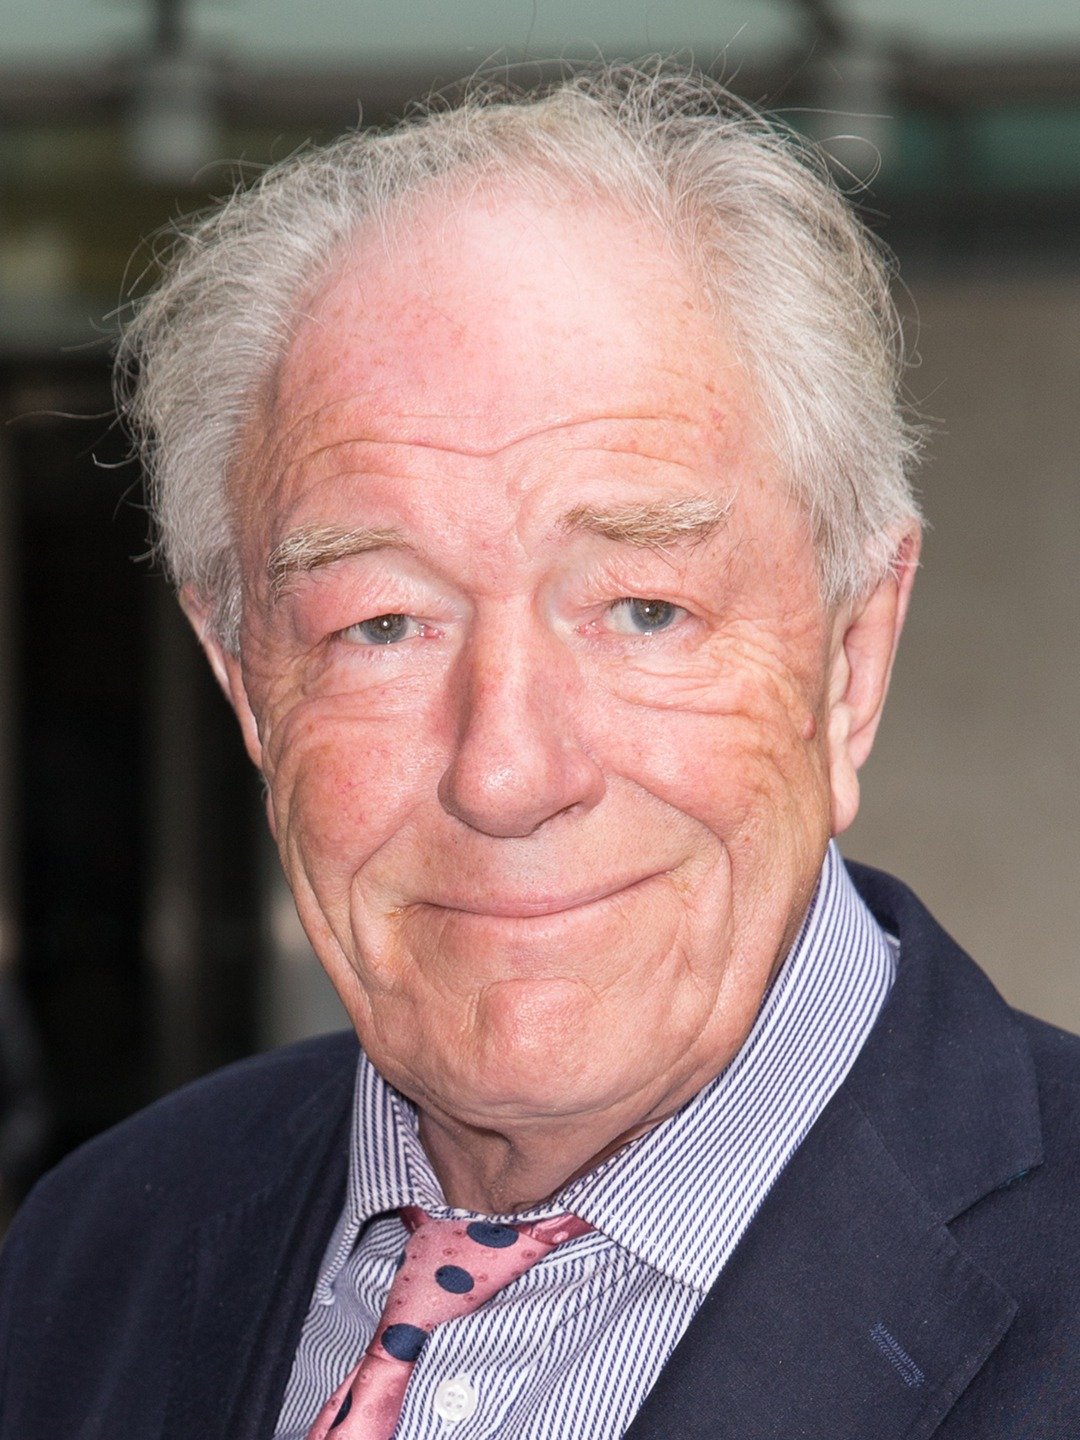 Michael Gambon The Man Who Brought Magic and Wisdom to the Screen